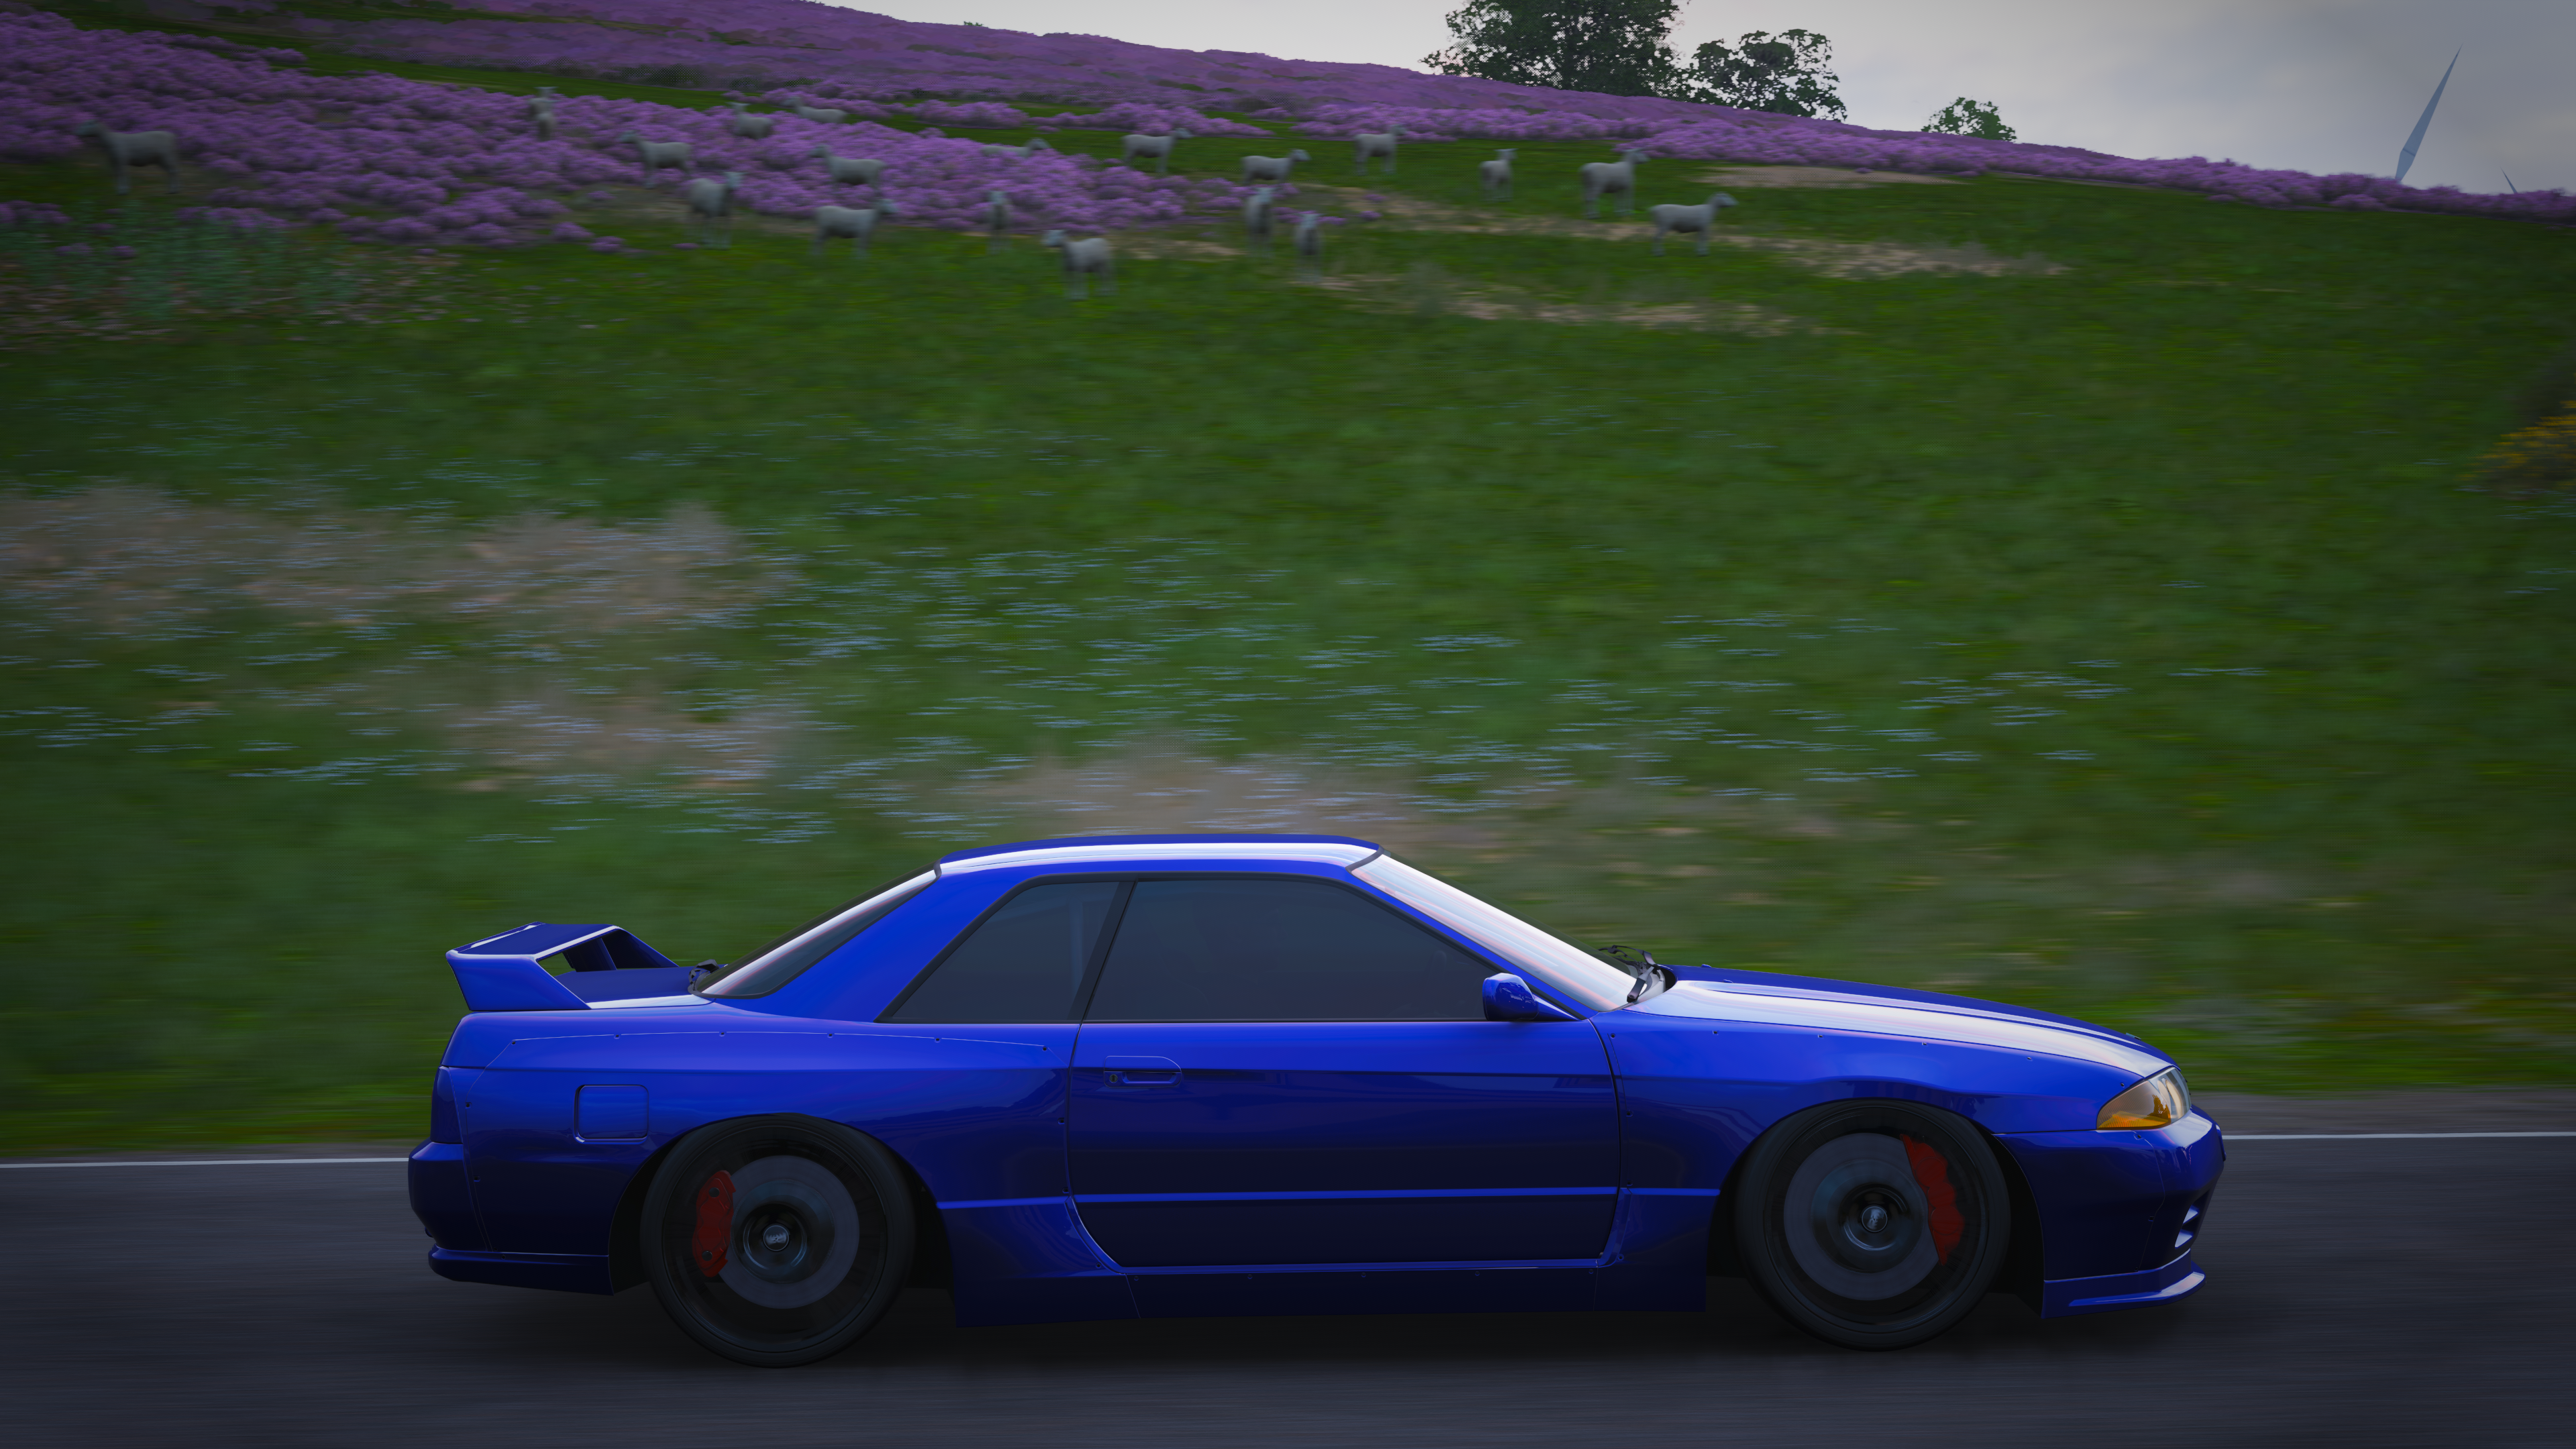 General 3840x2160 car vehicle Nissan Nissan Skyline R32 blue Forza Forza Horizon 4 Nissan Skyline side view PlaygroundGames video games Japanese cars